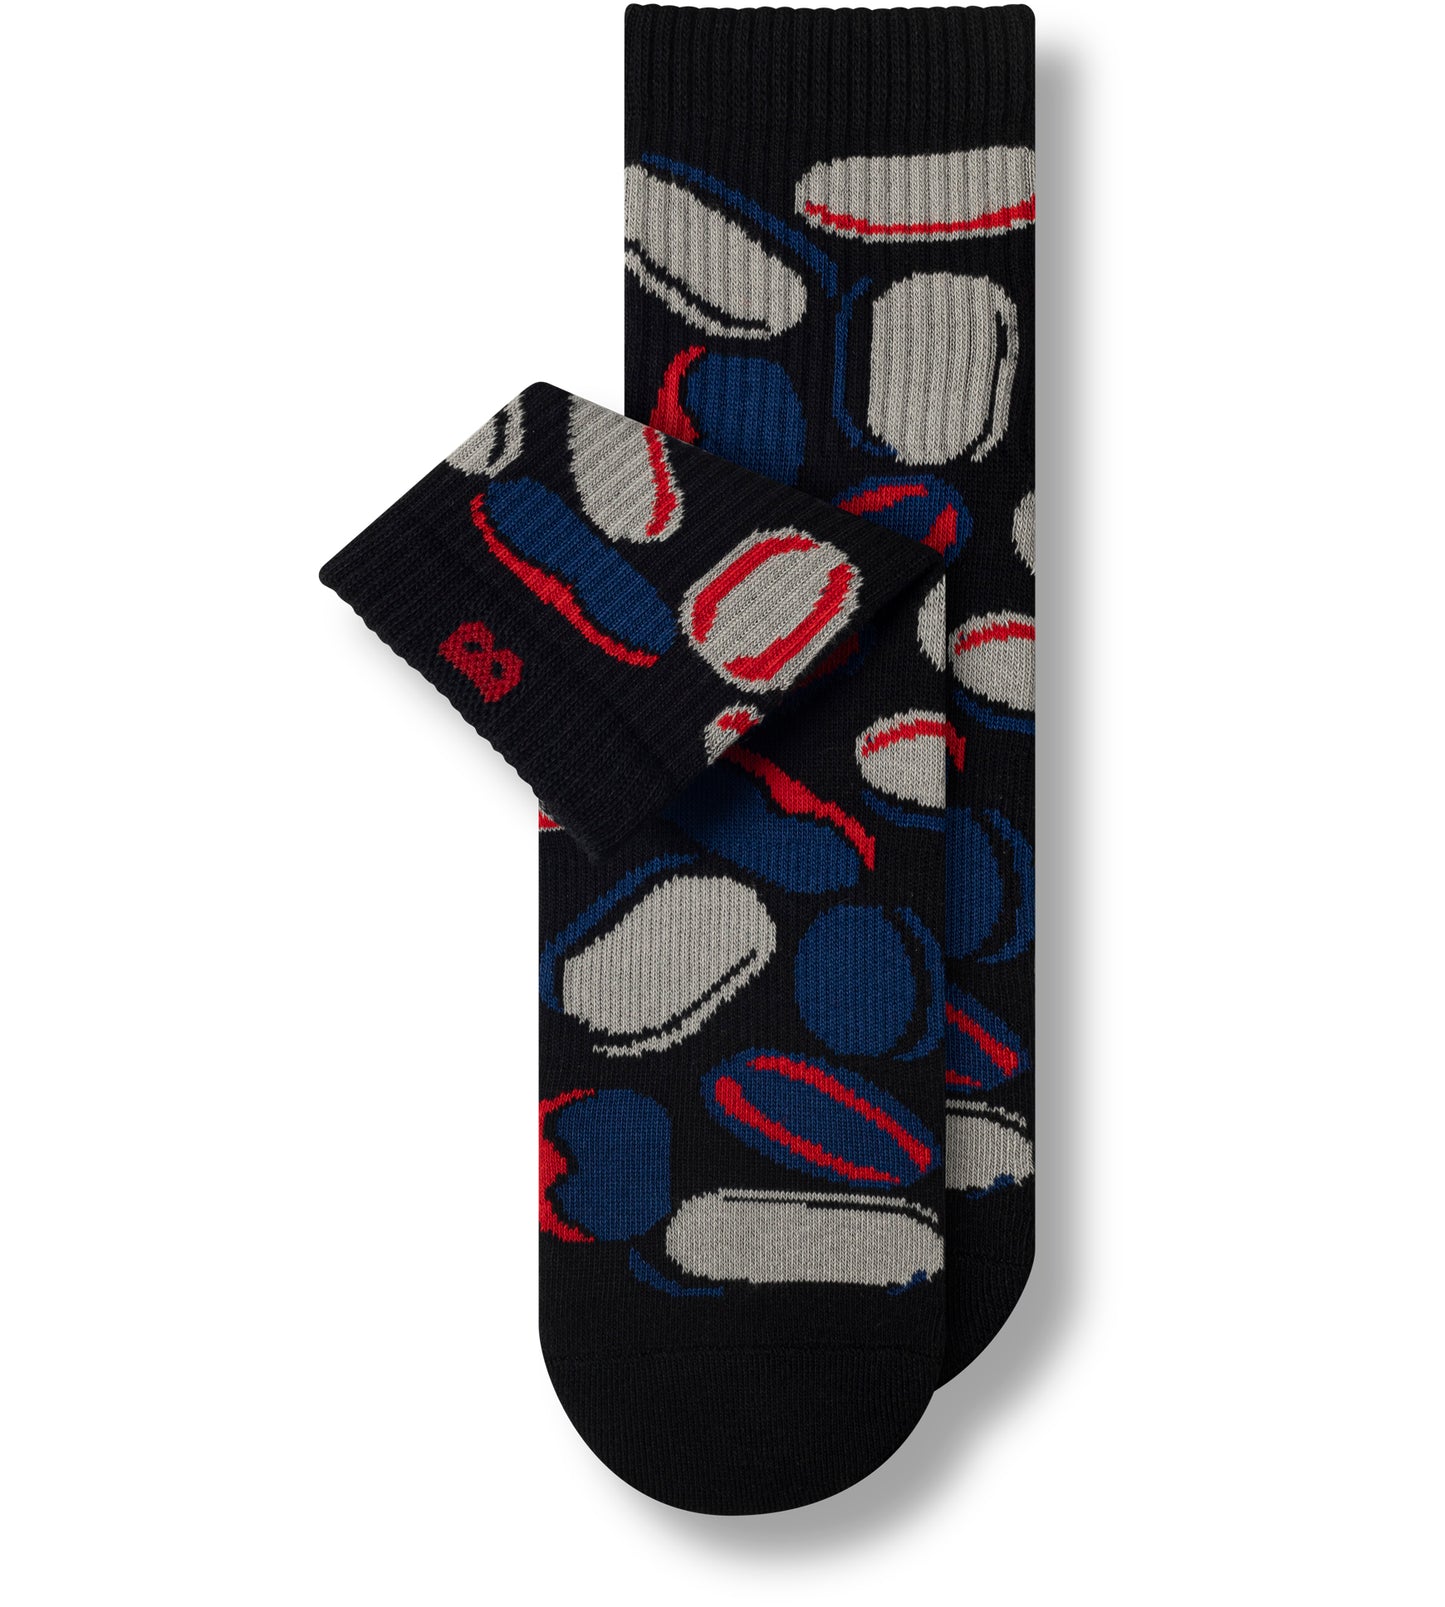 Men’s cushion ankle socks black with gray ovals and red lines